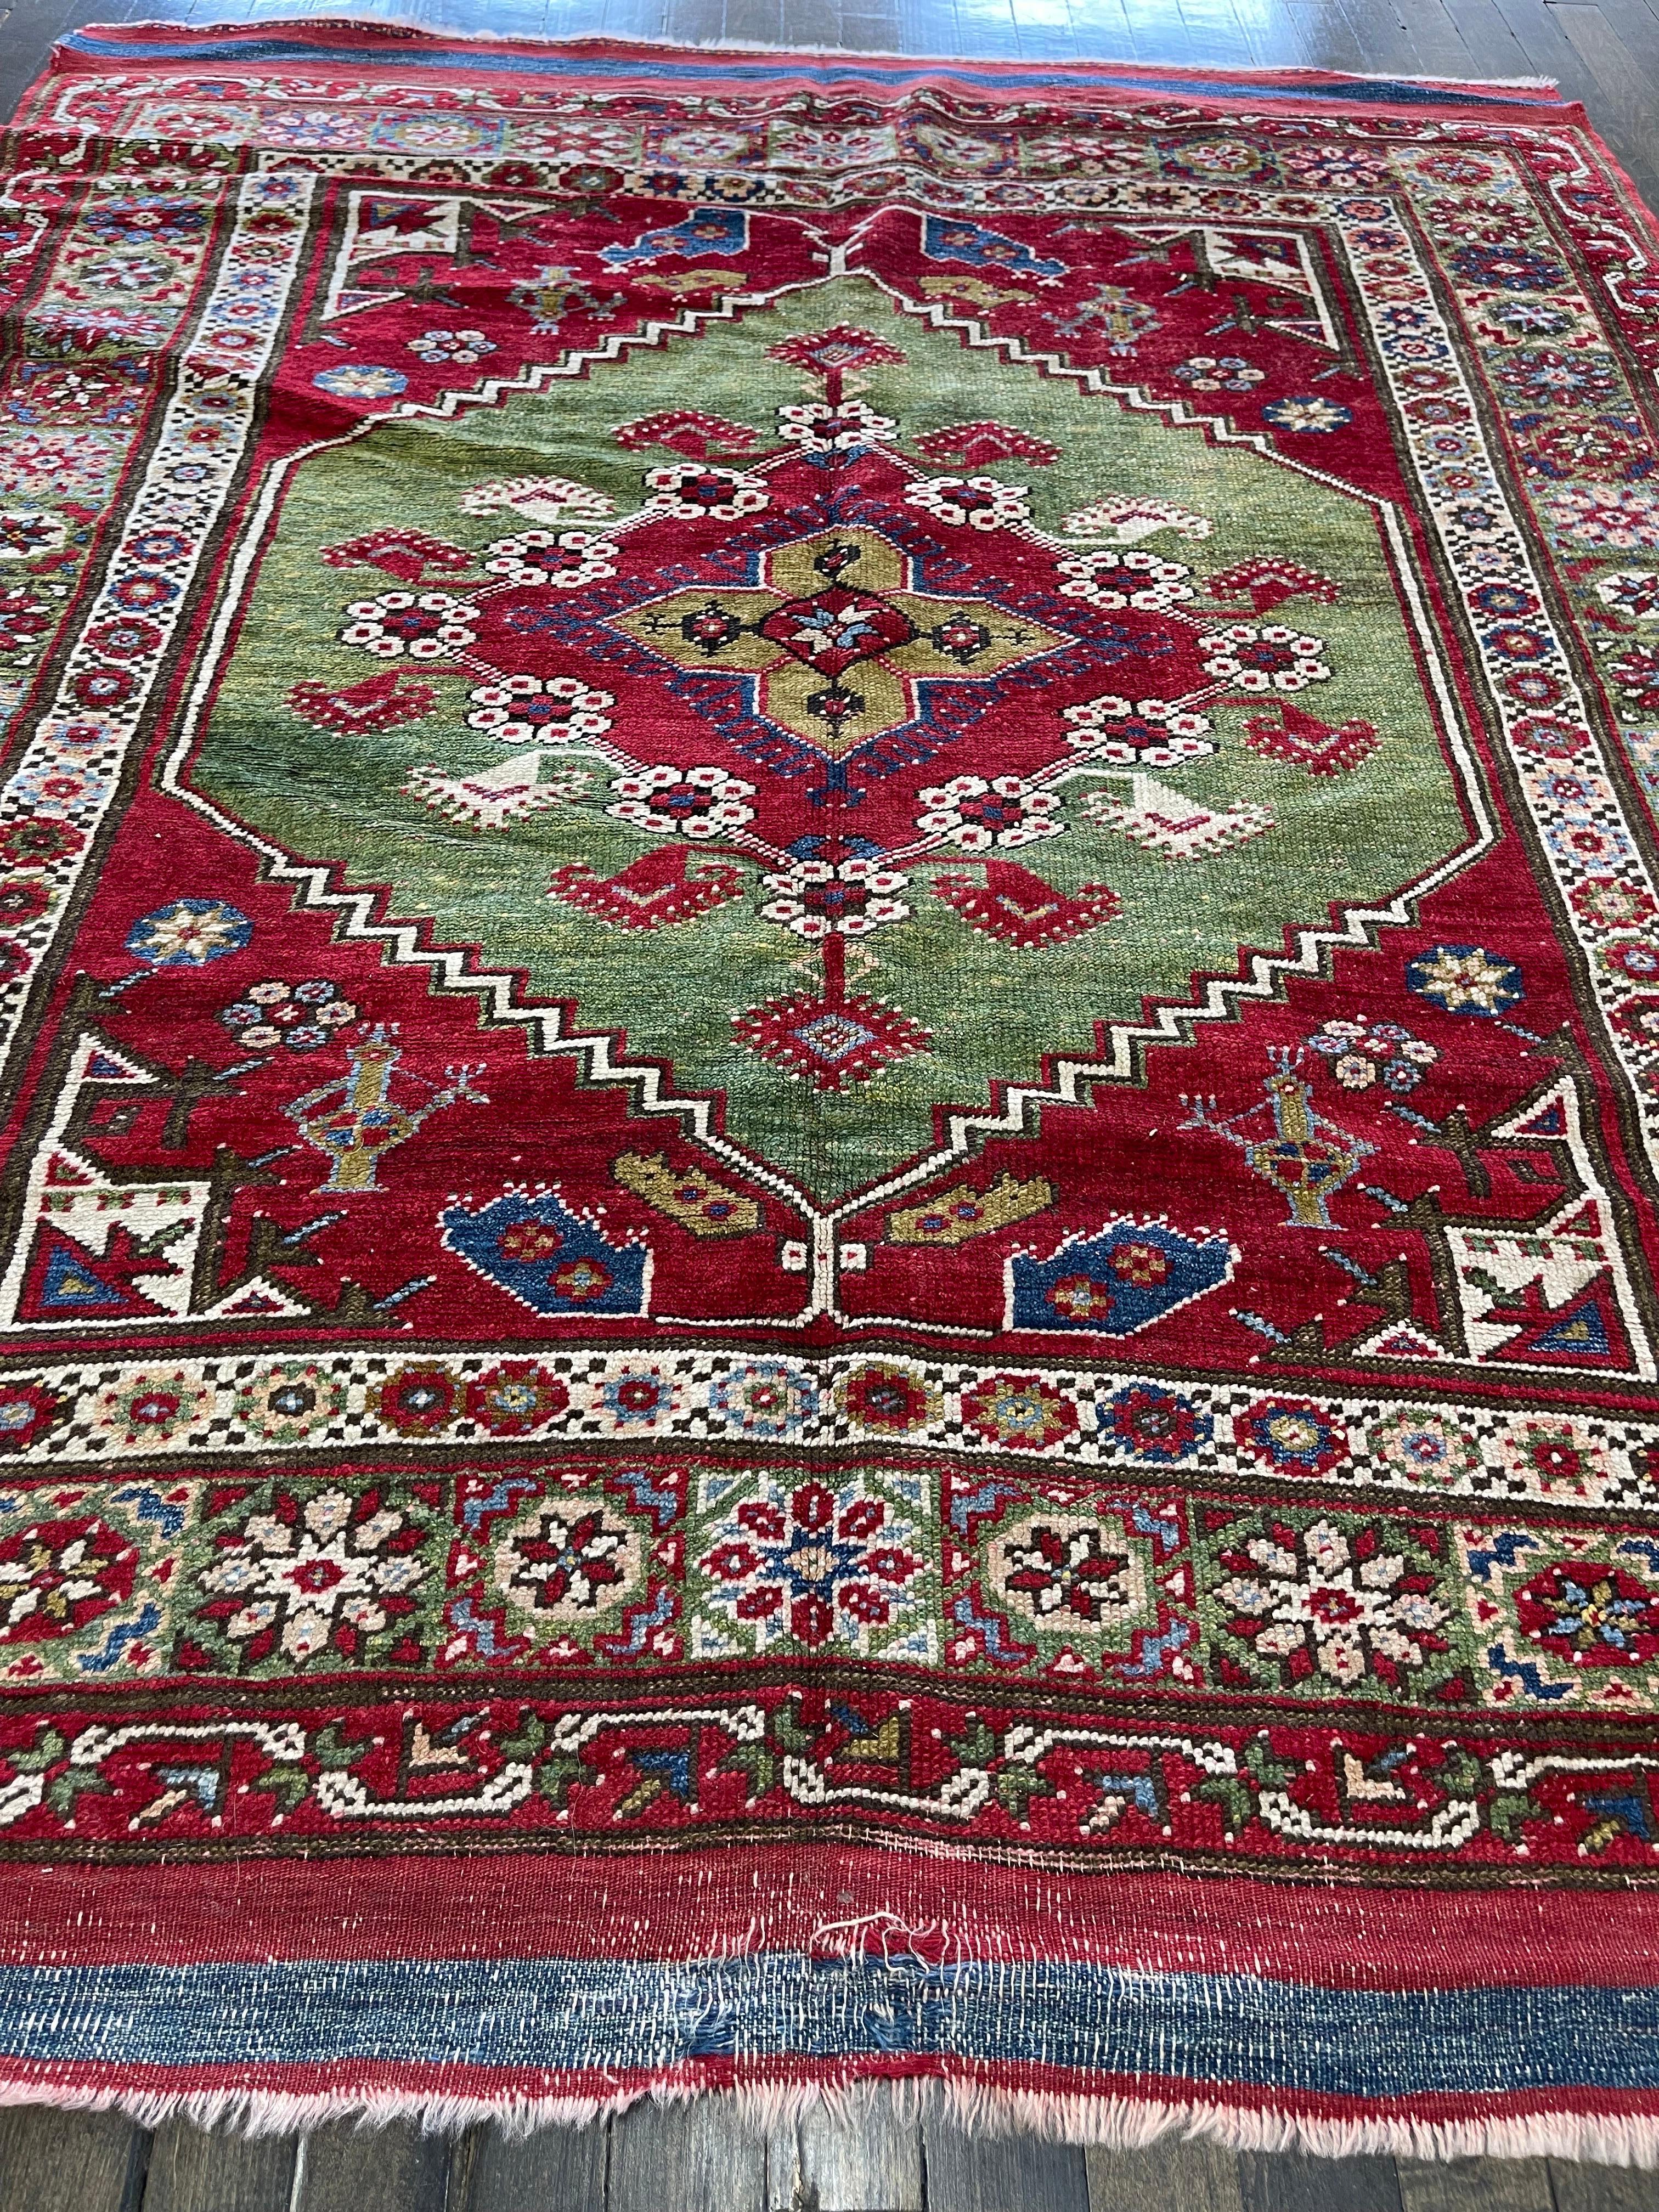 Unique in spanning both the continents of Europe and Asia, Turkey has a tradition of carpet-making for centuries and draws inspiration from Turkish culture but also its Eastern neighbors the Caucasus and Turkestan. This rare piece, perhaps a Bergama